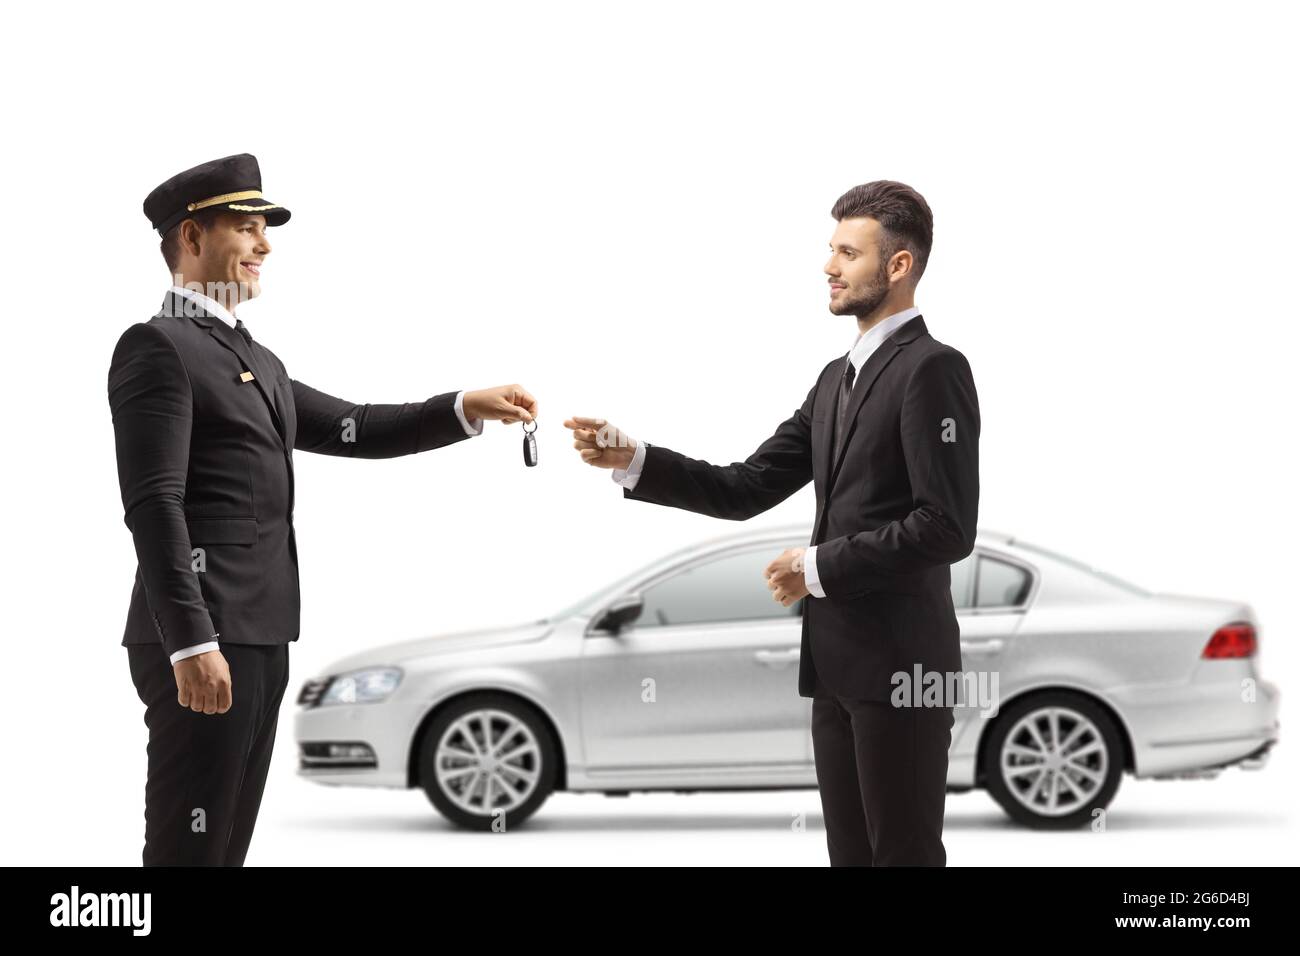 Chauffeur giving car keys from a silver car to a young businessman isolated on white background Stock Photo